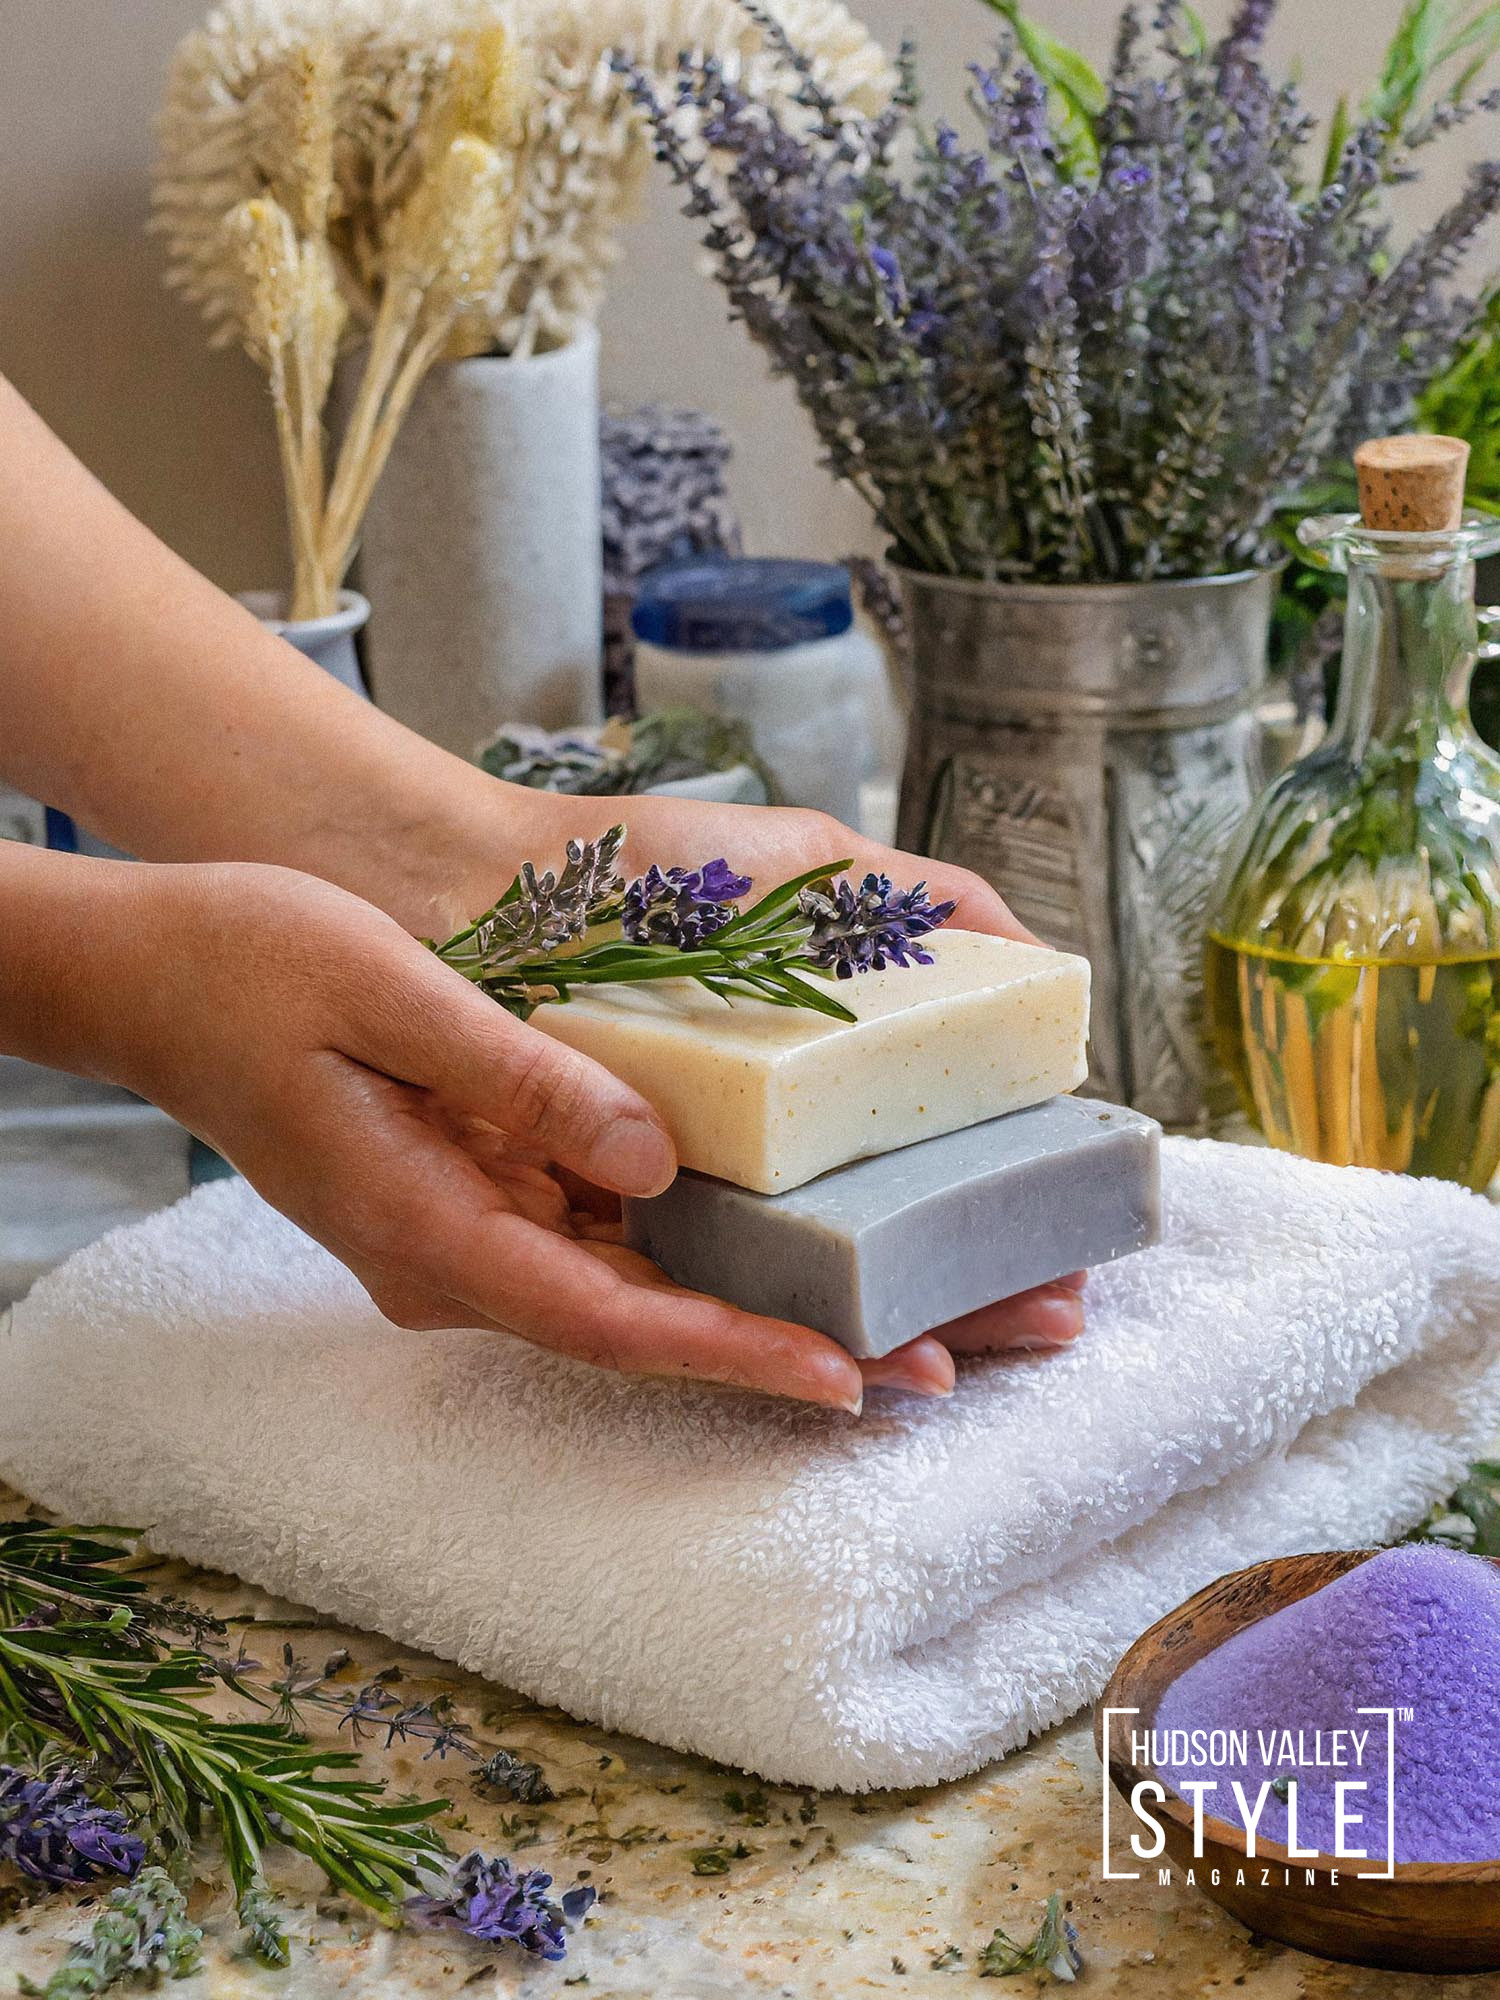 Embrace Nature's Touch: Alluvion's Aromatherapy & Natural Skincare Marvels for Discerning Hudson Valley Travelers – Presented by Alluvion Vacations